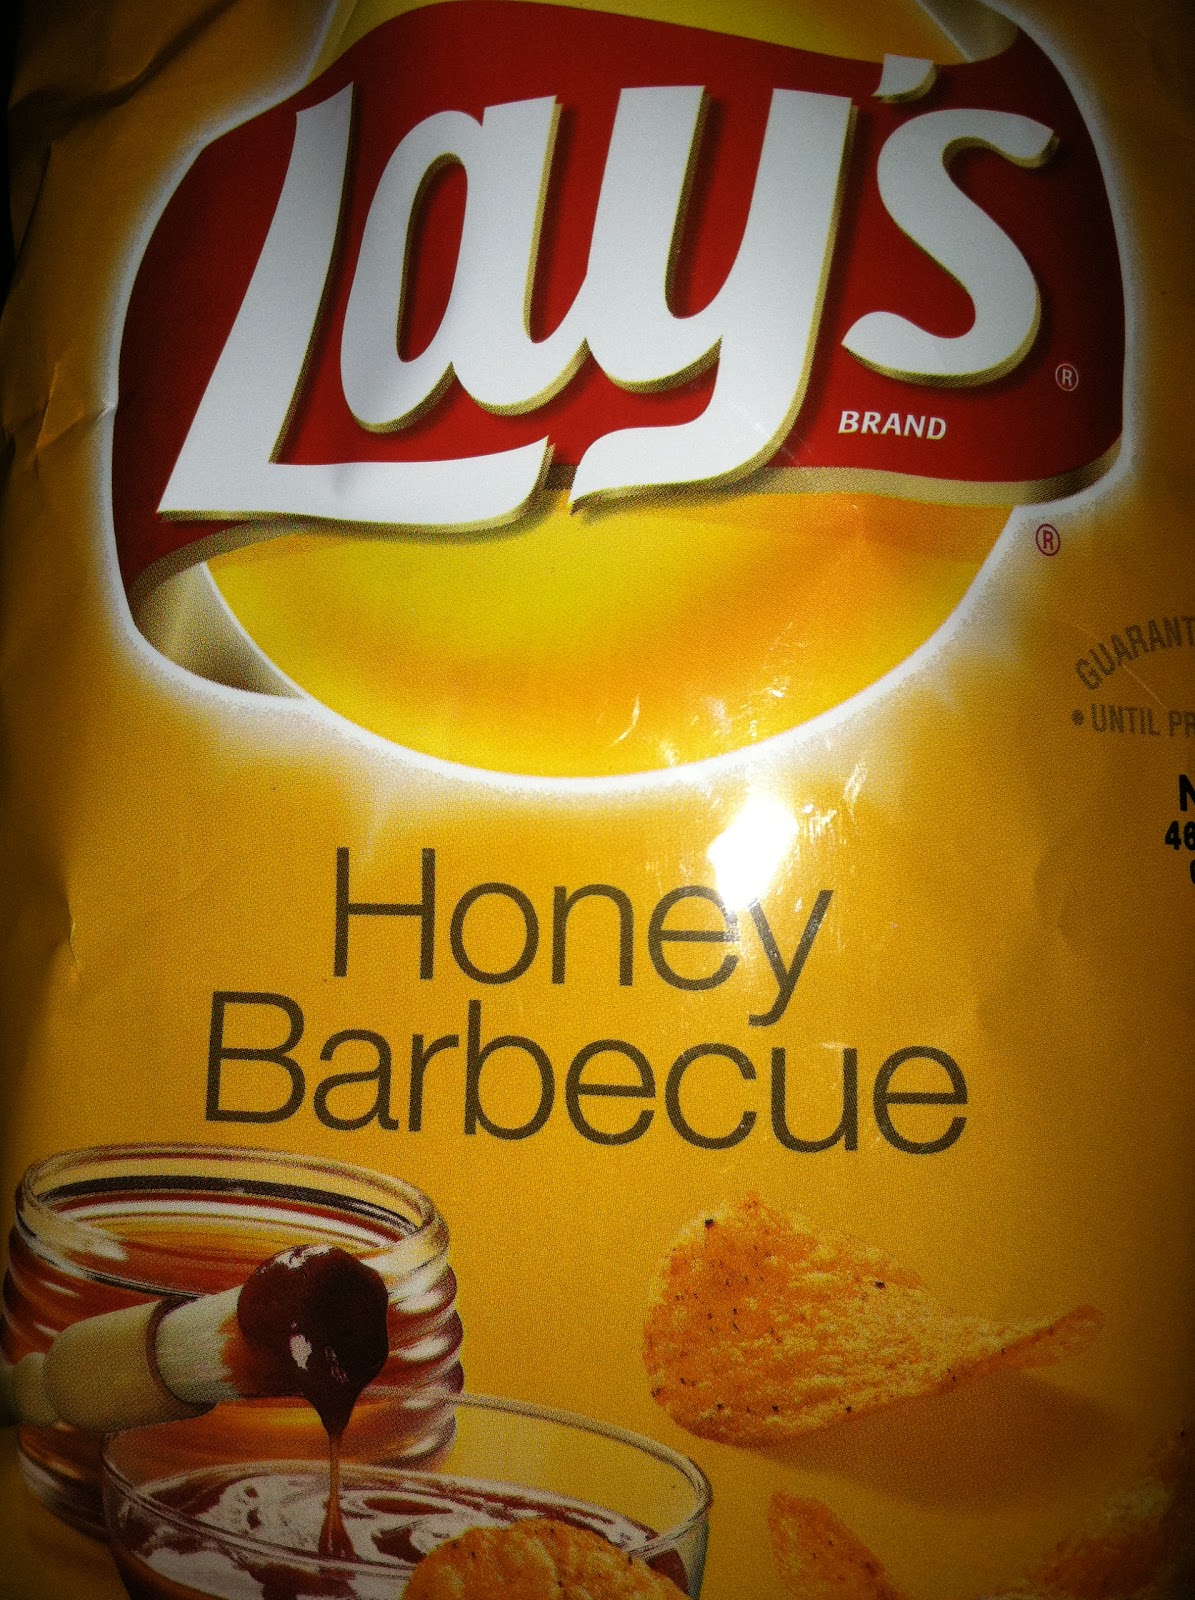 French Fry Diary: French Fry Diary 288: Lay's Honey Barbecue Potato Chips